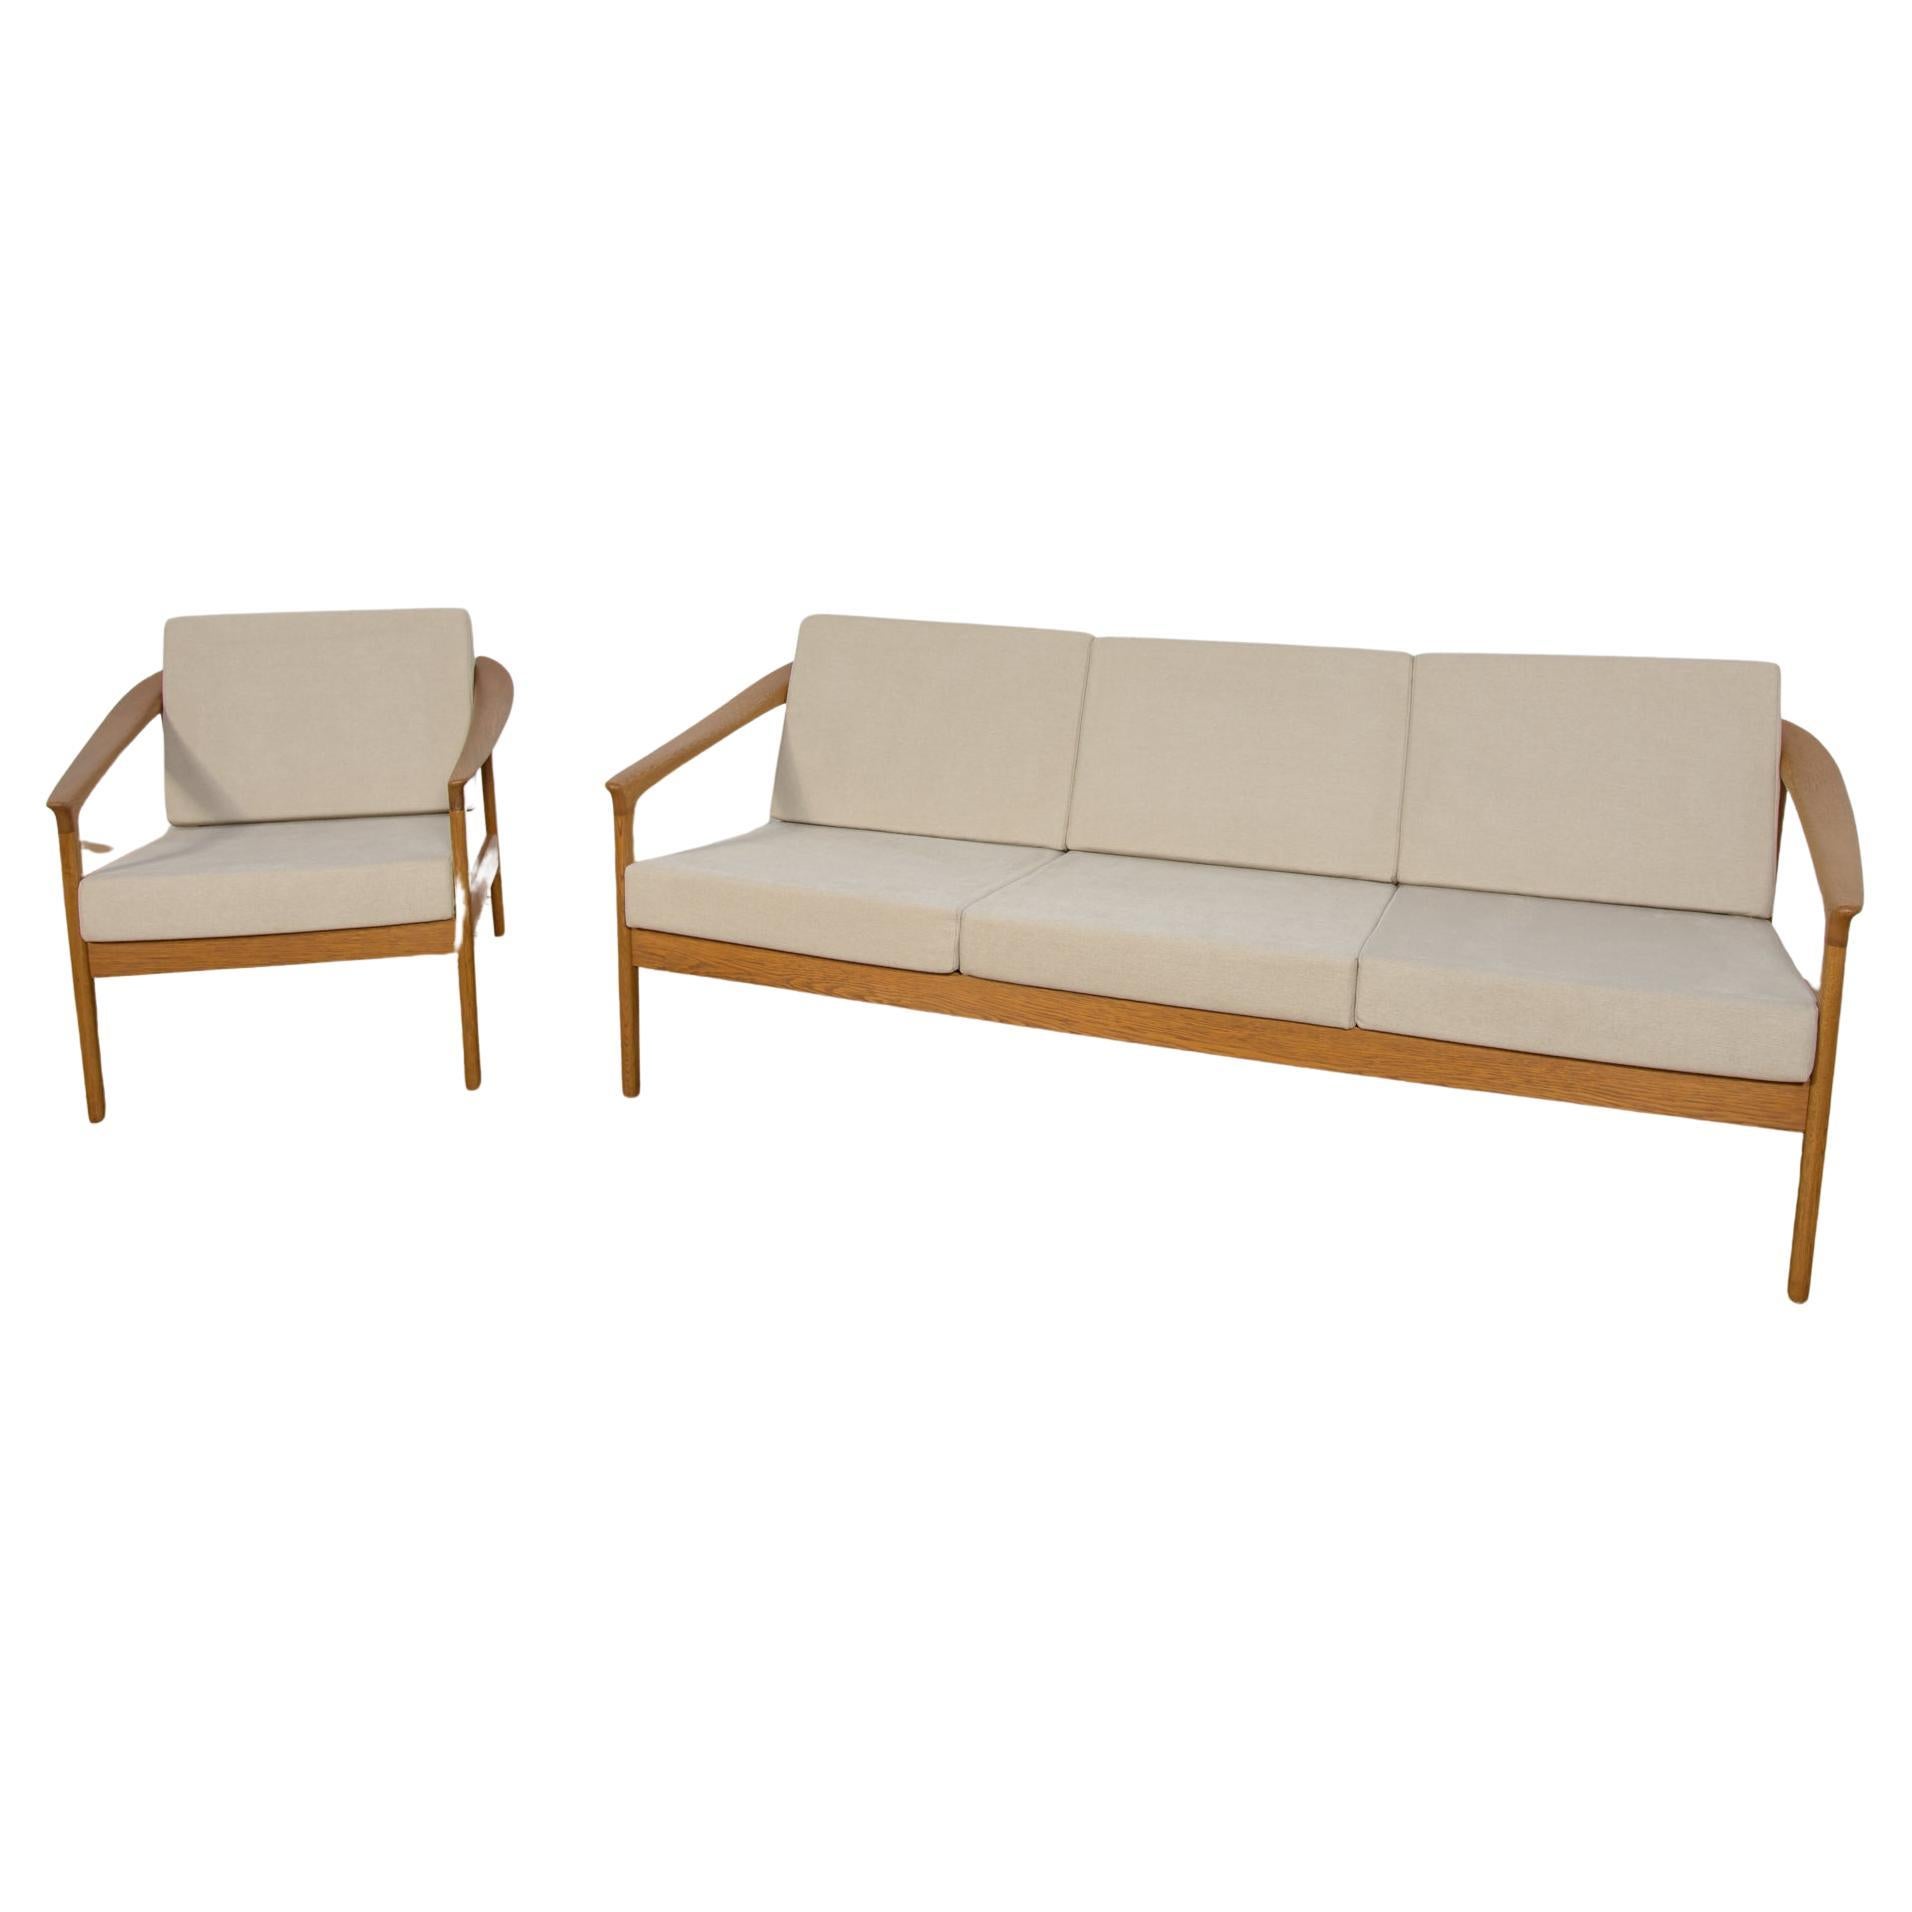 Mid Century Sofa and Armchair Monterey /5-161 by Folke Ohlsson for Bodafors. For Sale